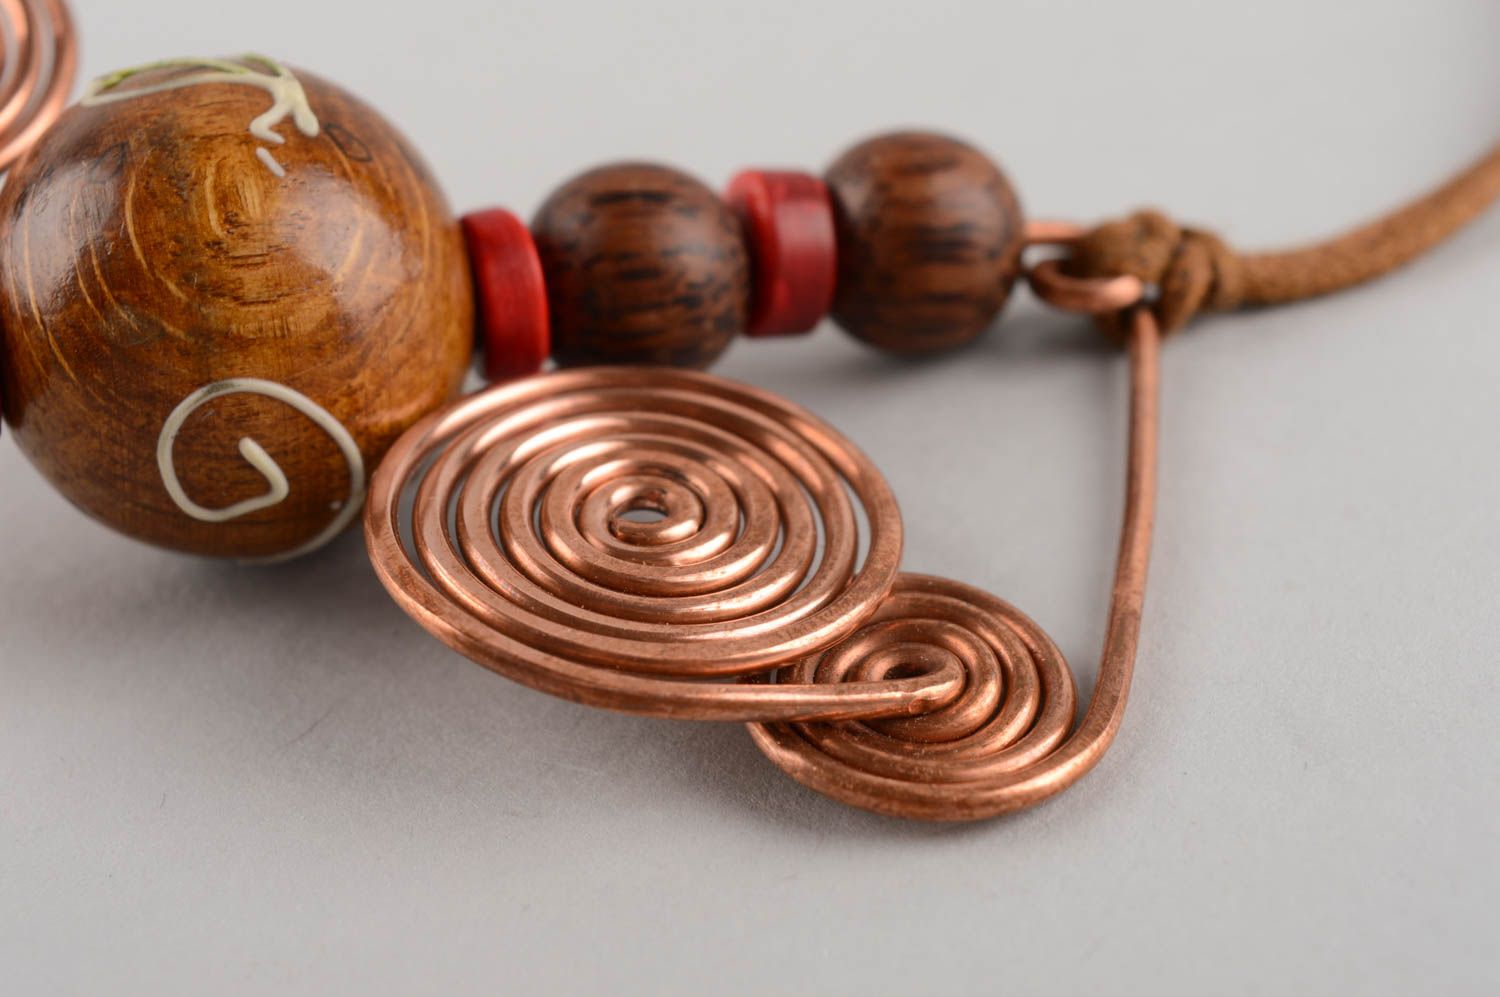 Handmade designer copper wire pendant with wooden beads on cord women accessory photo 4